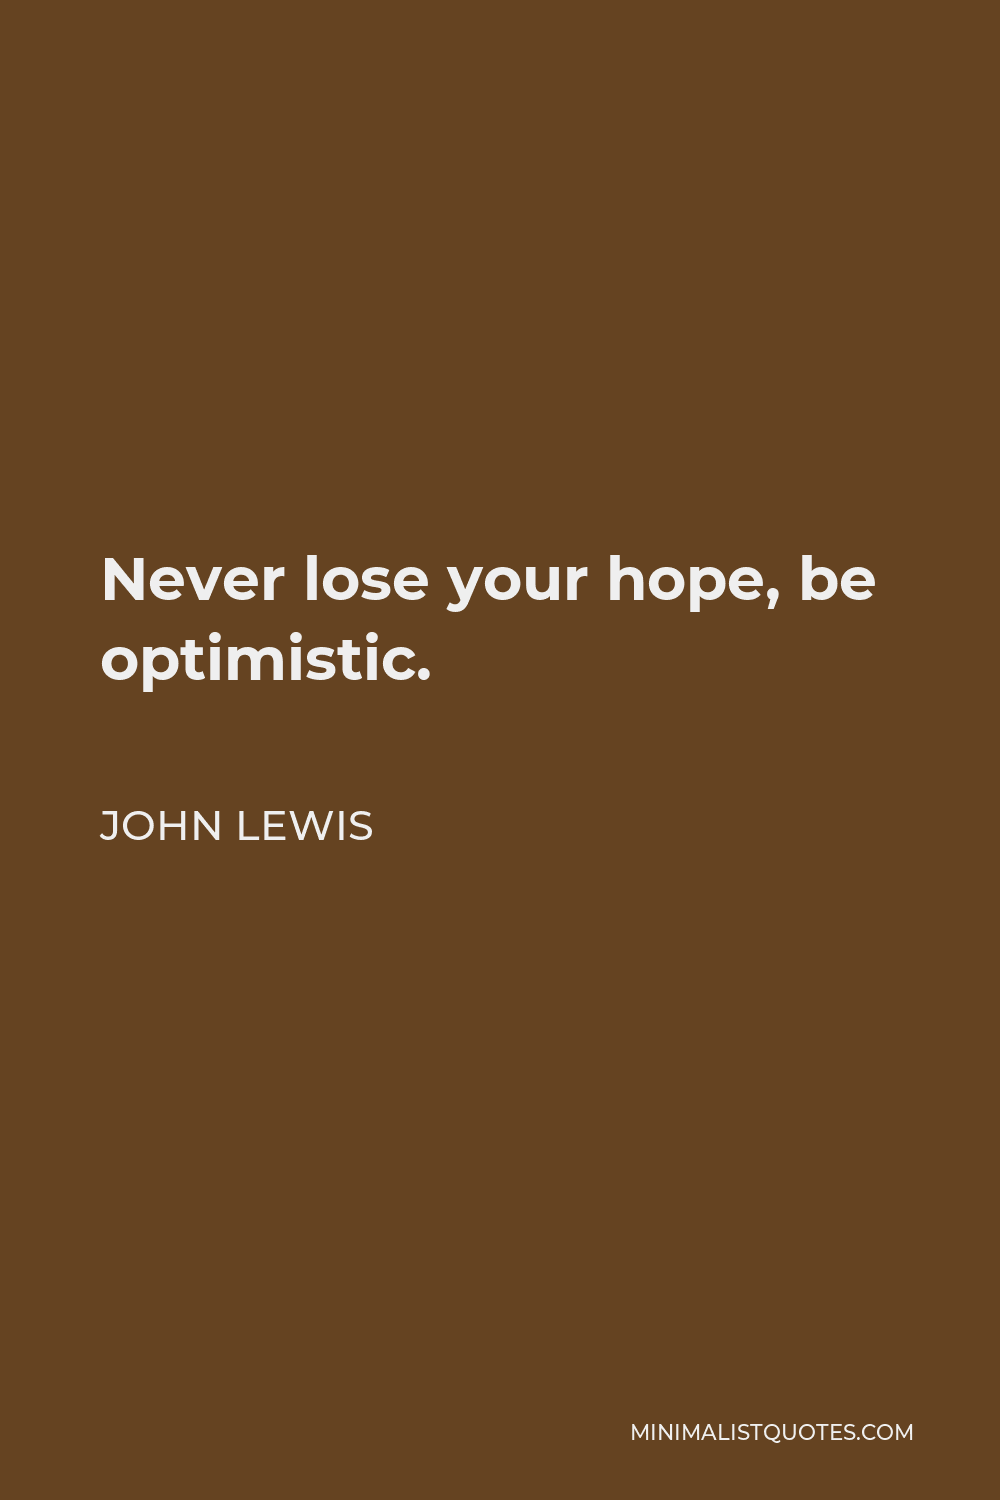 John Lewis Quote - Never lose your hope, be optimistic.